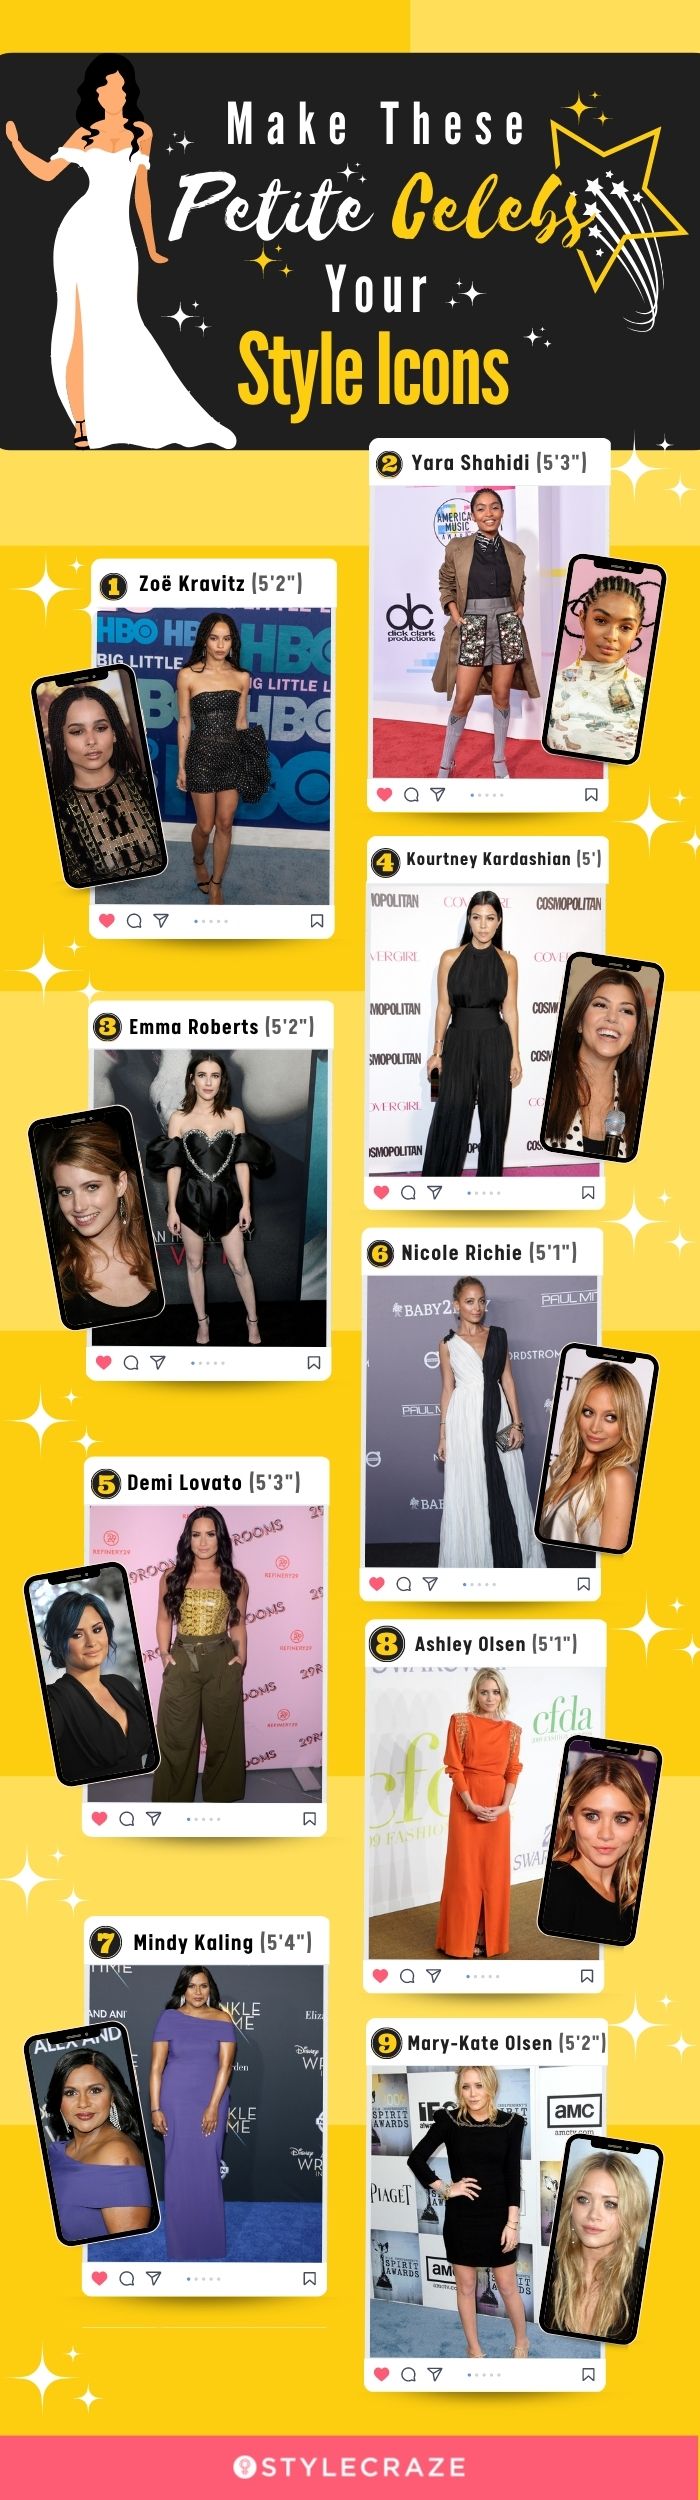 make these petite celebs your style icons [infographic]